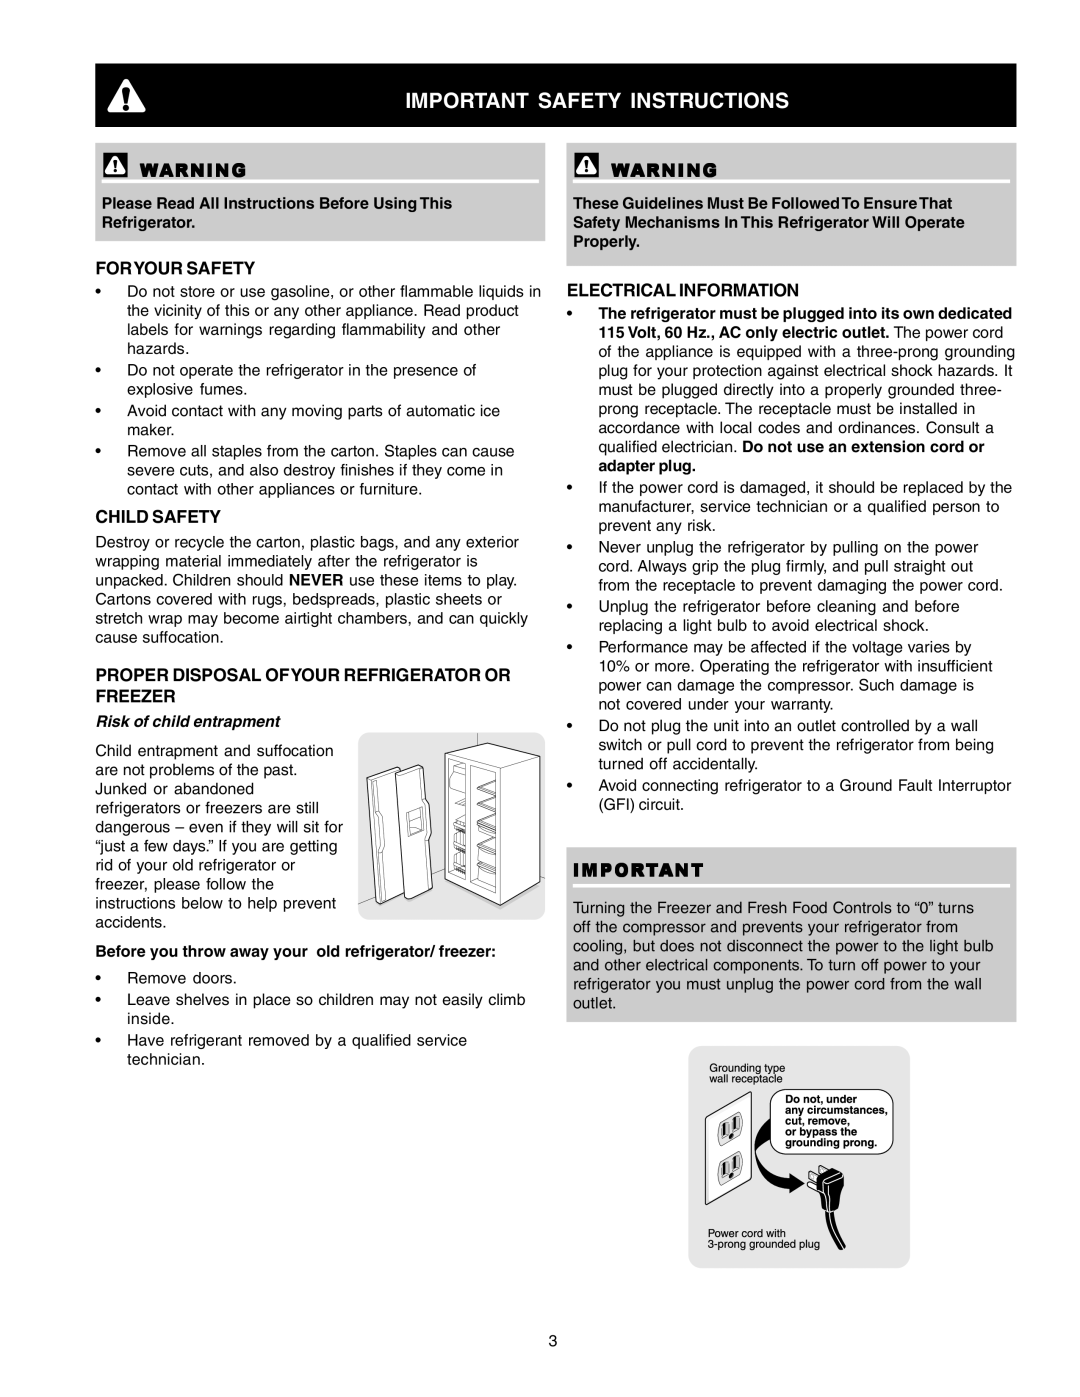 Frigidaire FRS23F4CW5, FRS6R5EMB1 manual Important Safety Instructions, Foryour Safety, Child Safety, Electrical Information 